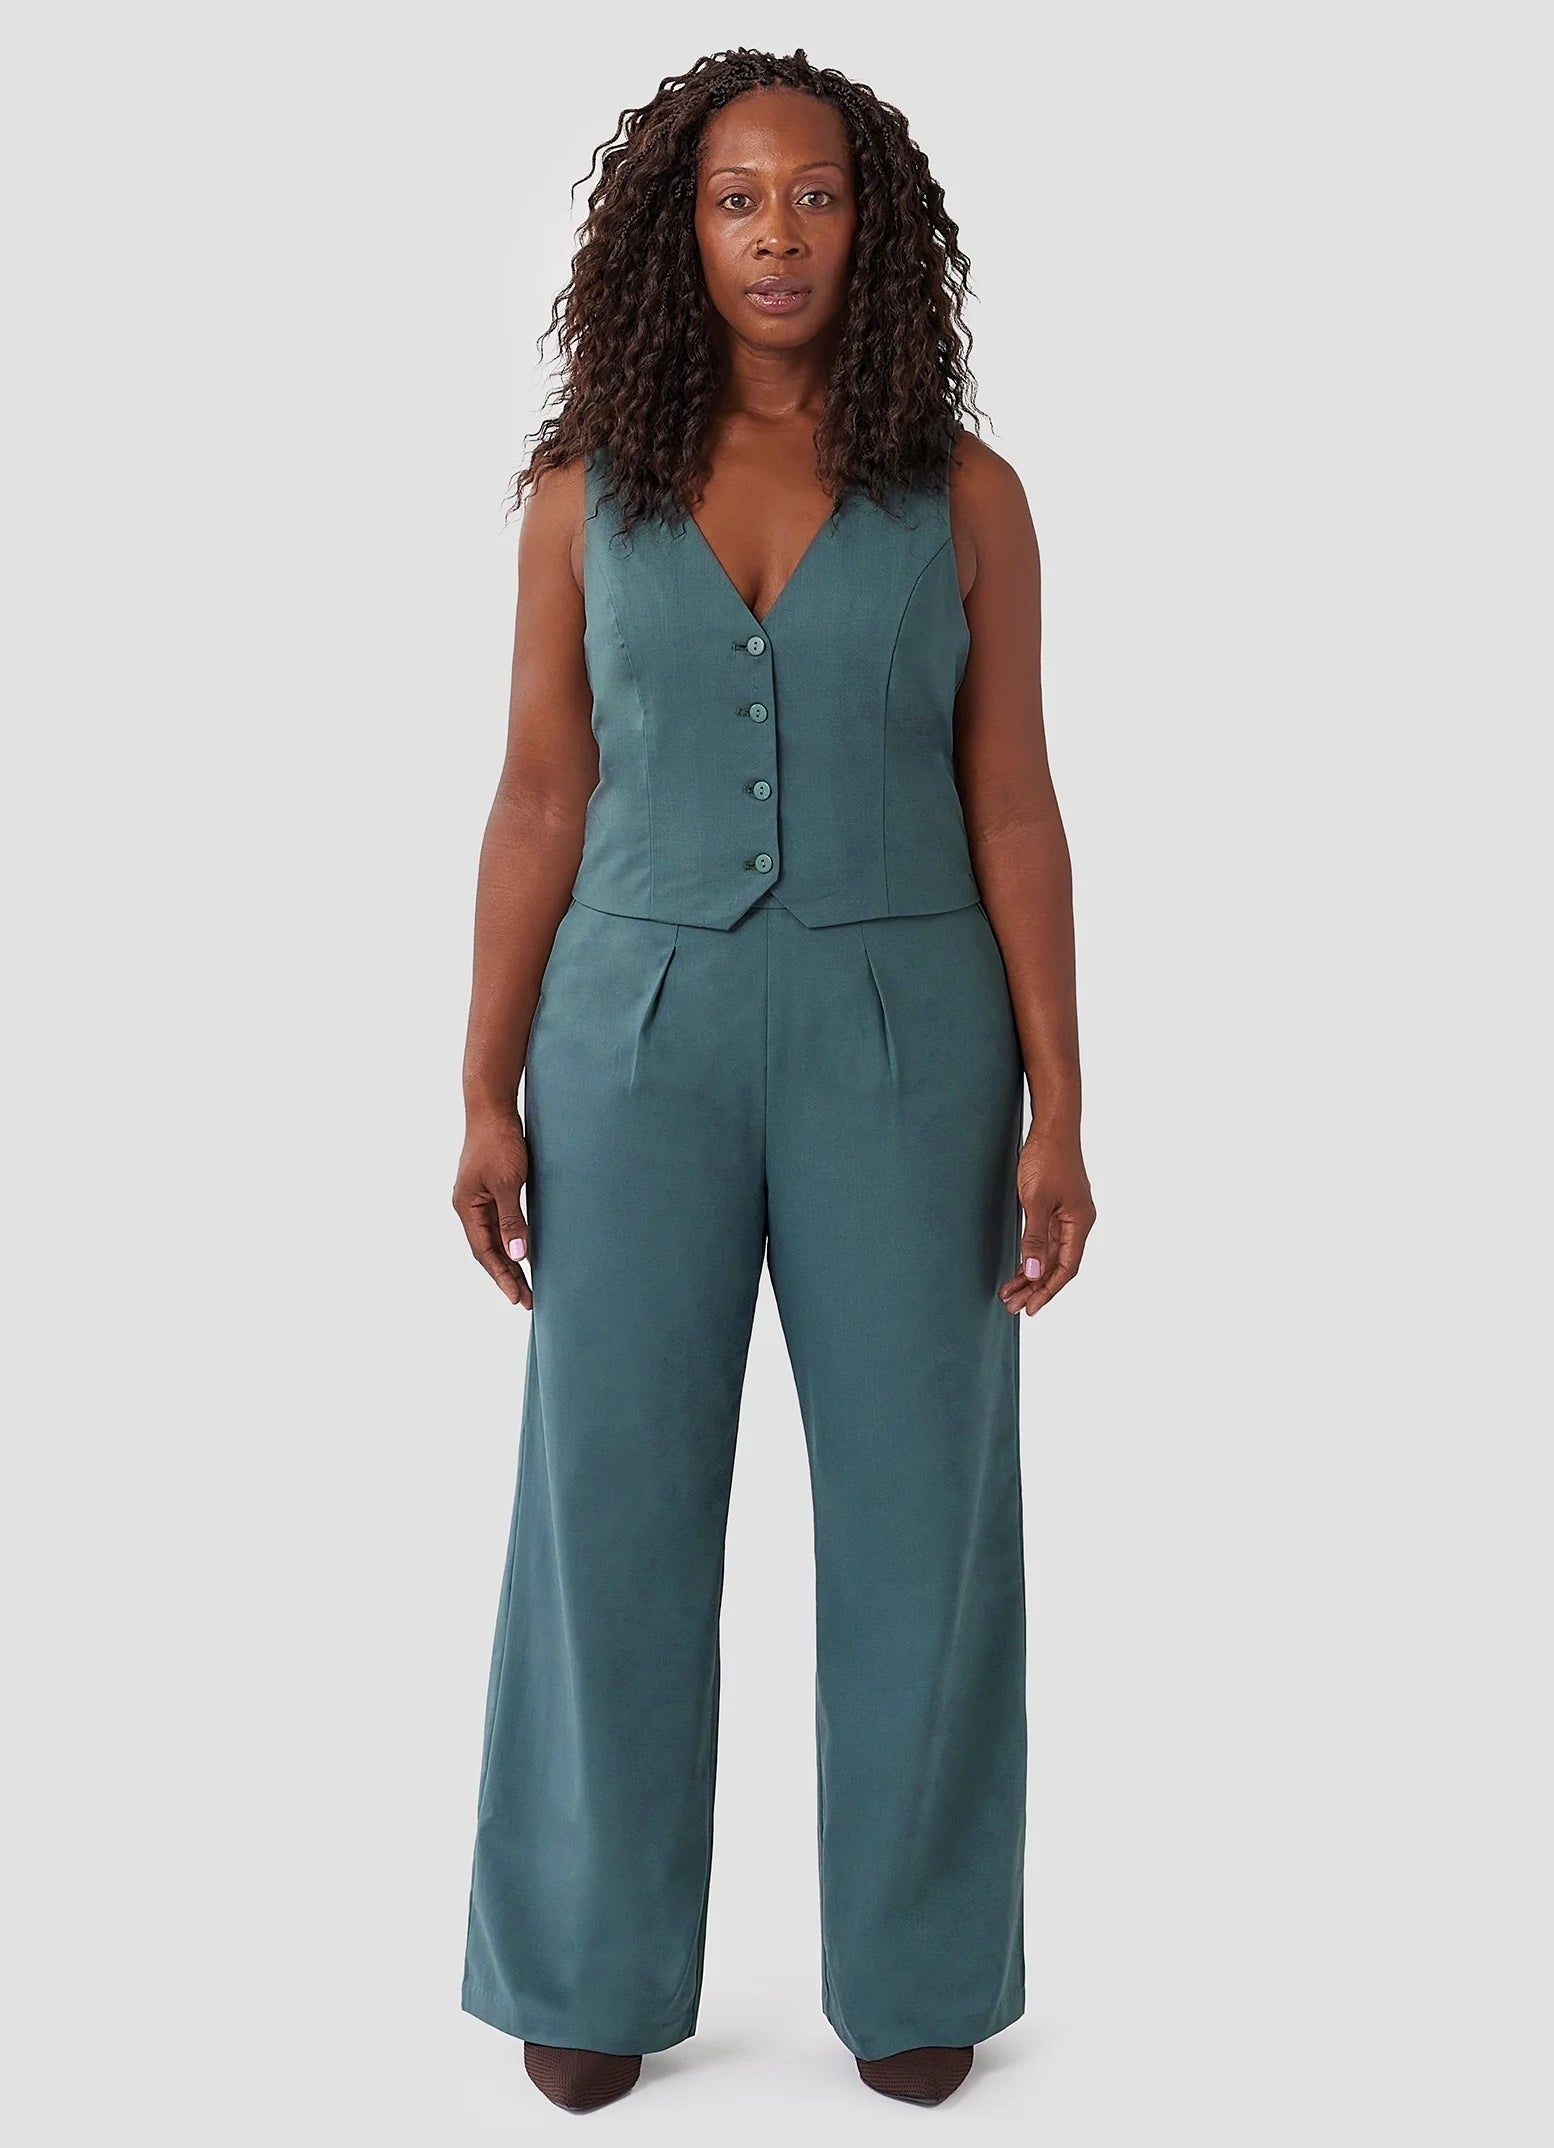 model in matching teal vest and wide-legged trouser set